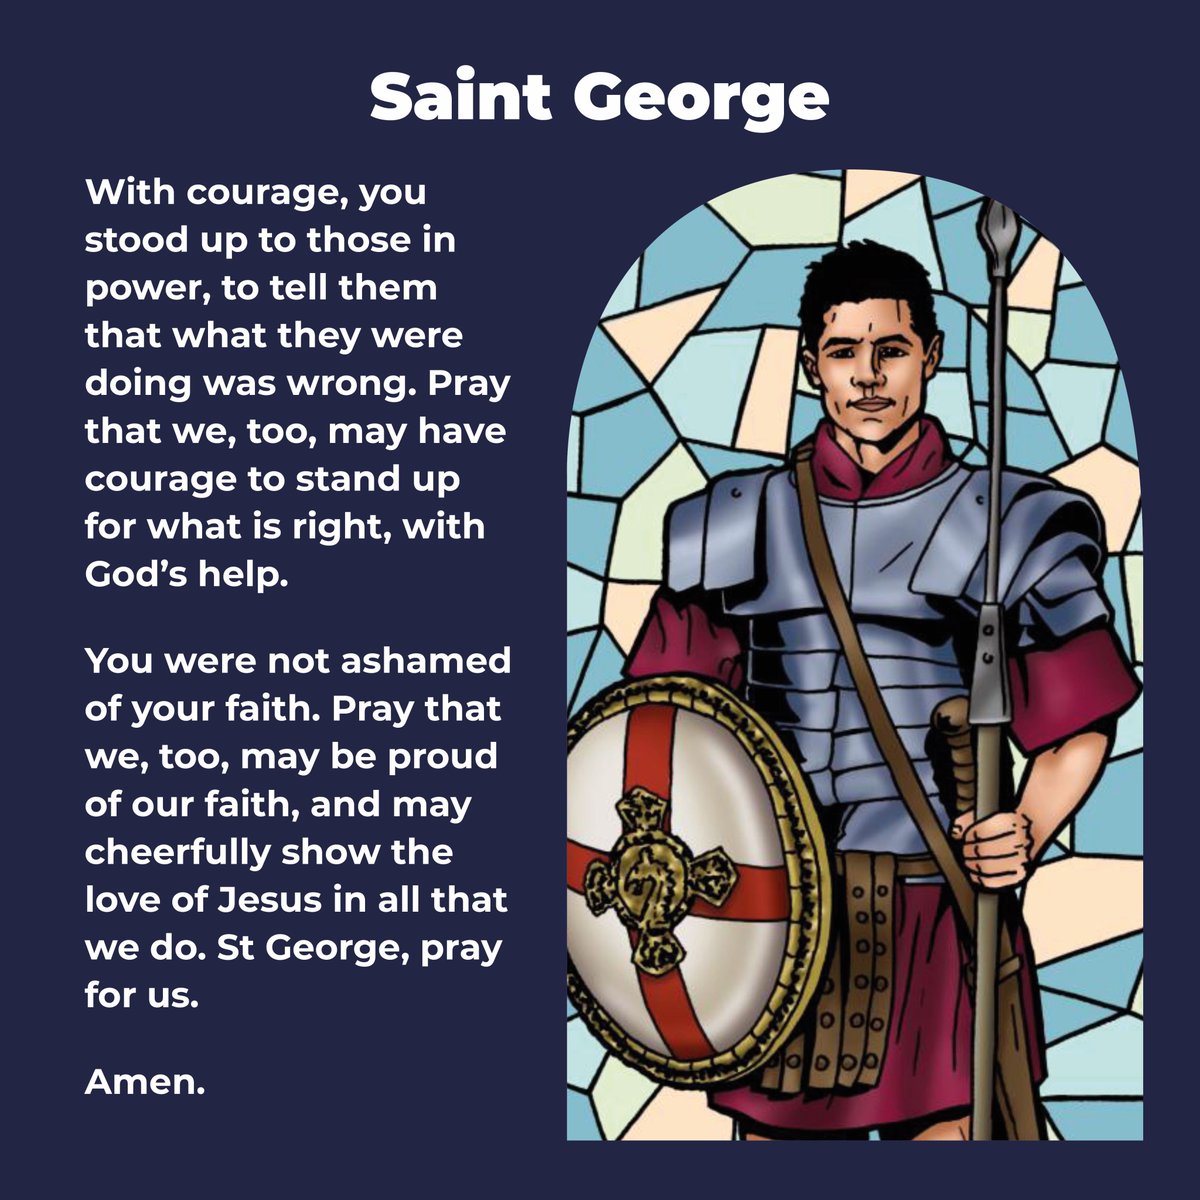 Today, we celebrate the feast of St George, Martyr and patron saint of England. We pray for all those who face hardships because they speak out for what is right and for the courage to do the same. #StGeorge #PrayForUs